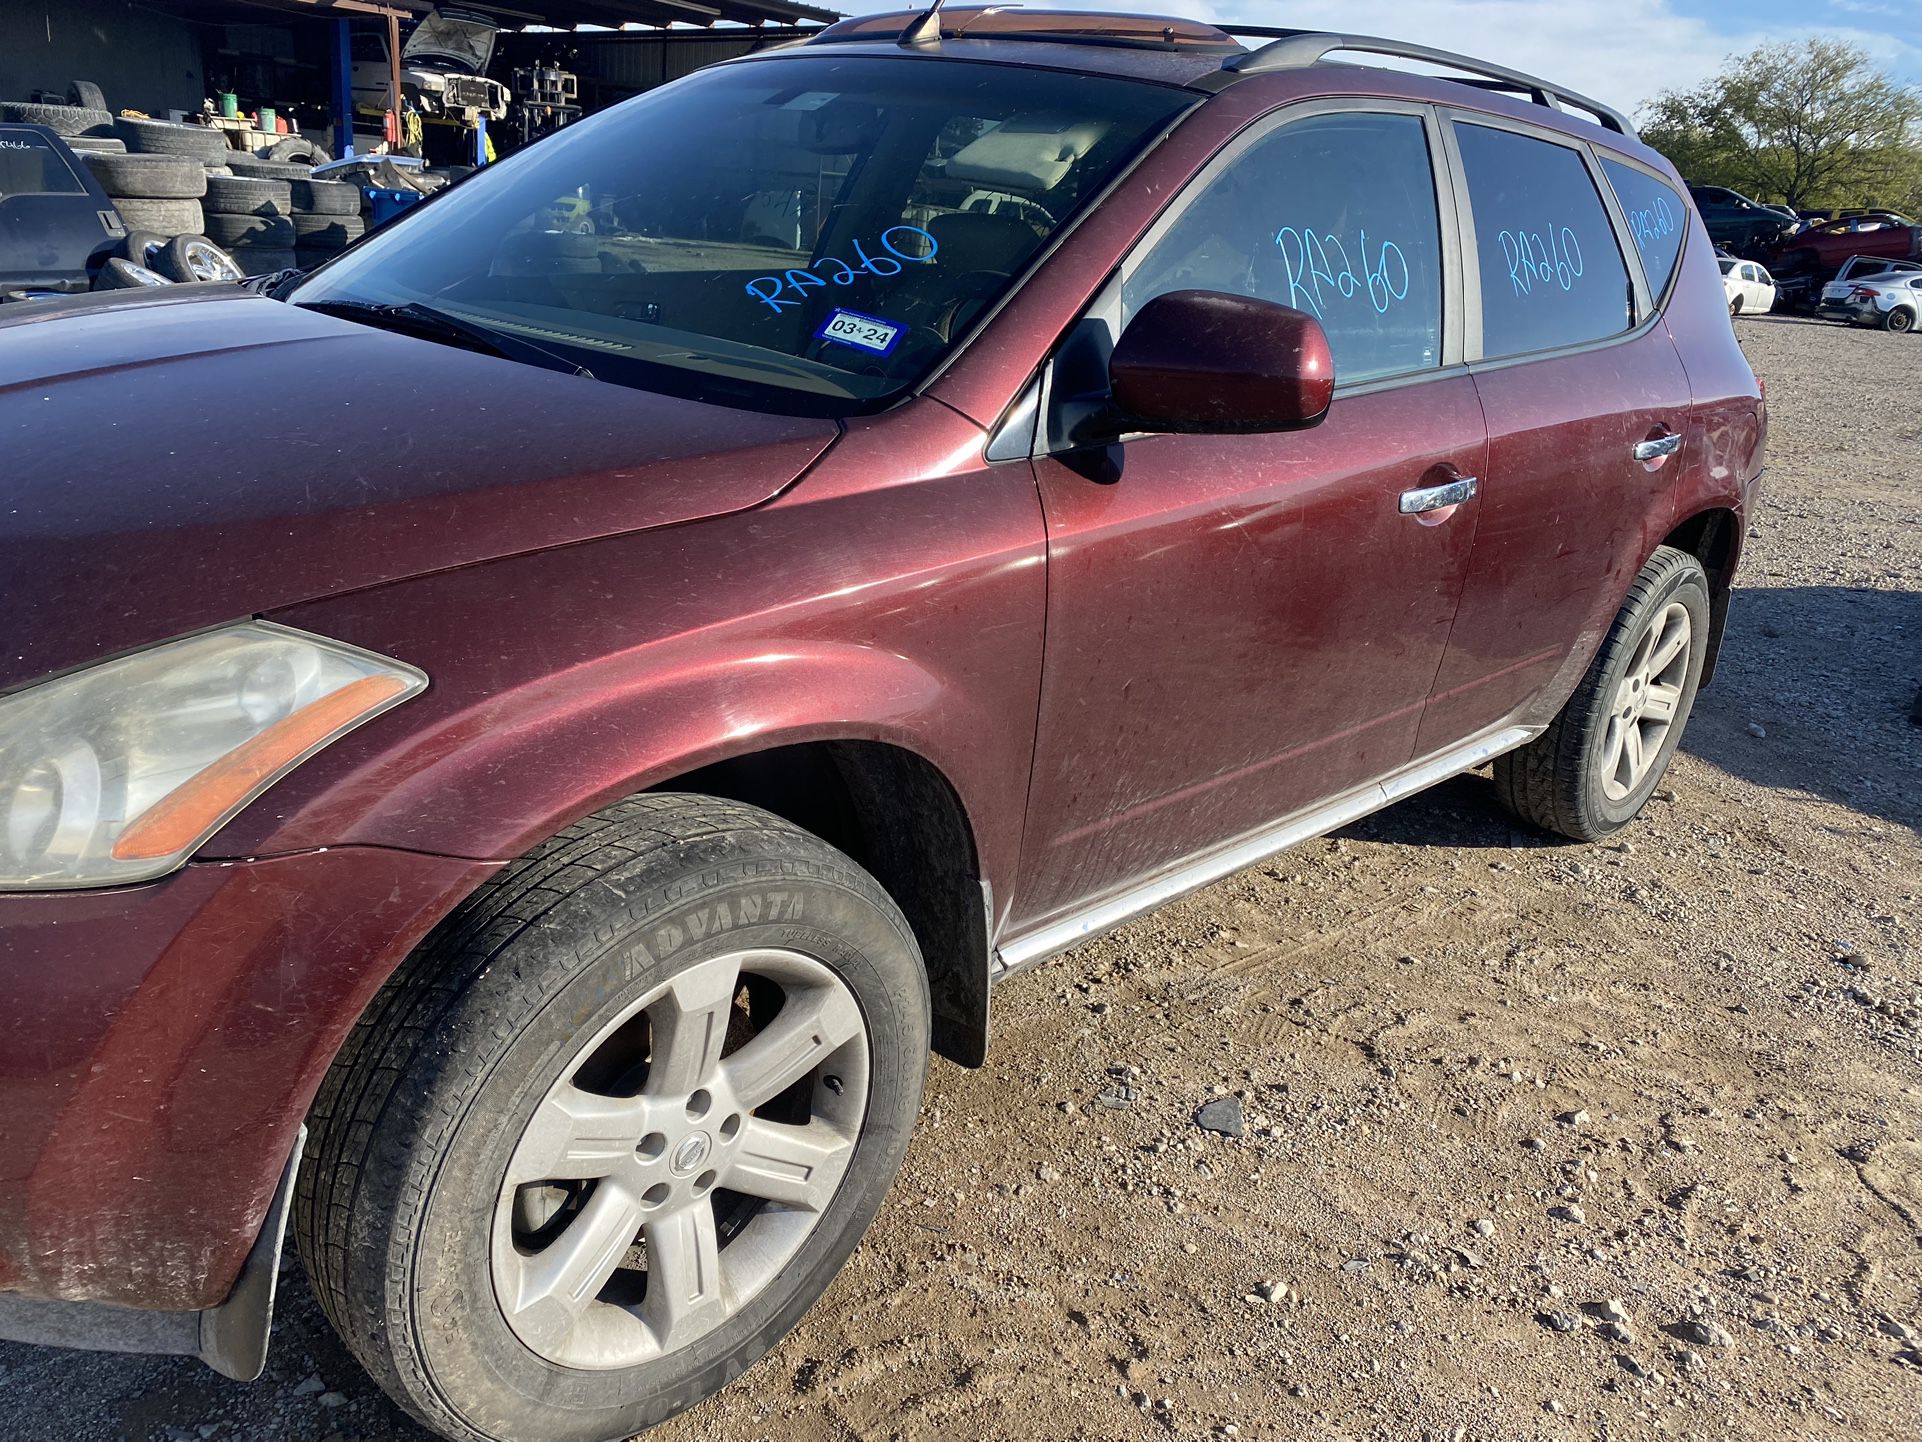 For parts only 2006 NISSAN MURANO SL 3.5L fwd transmission/ solo para partes